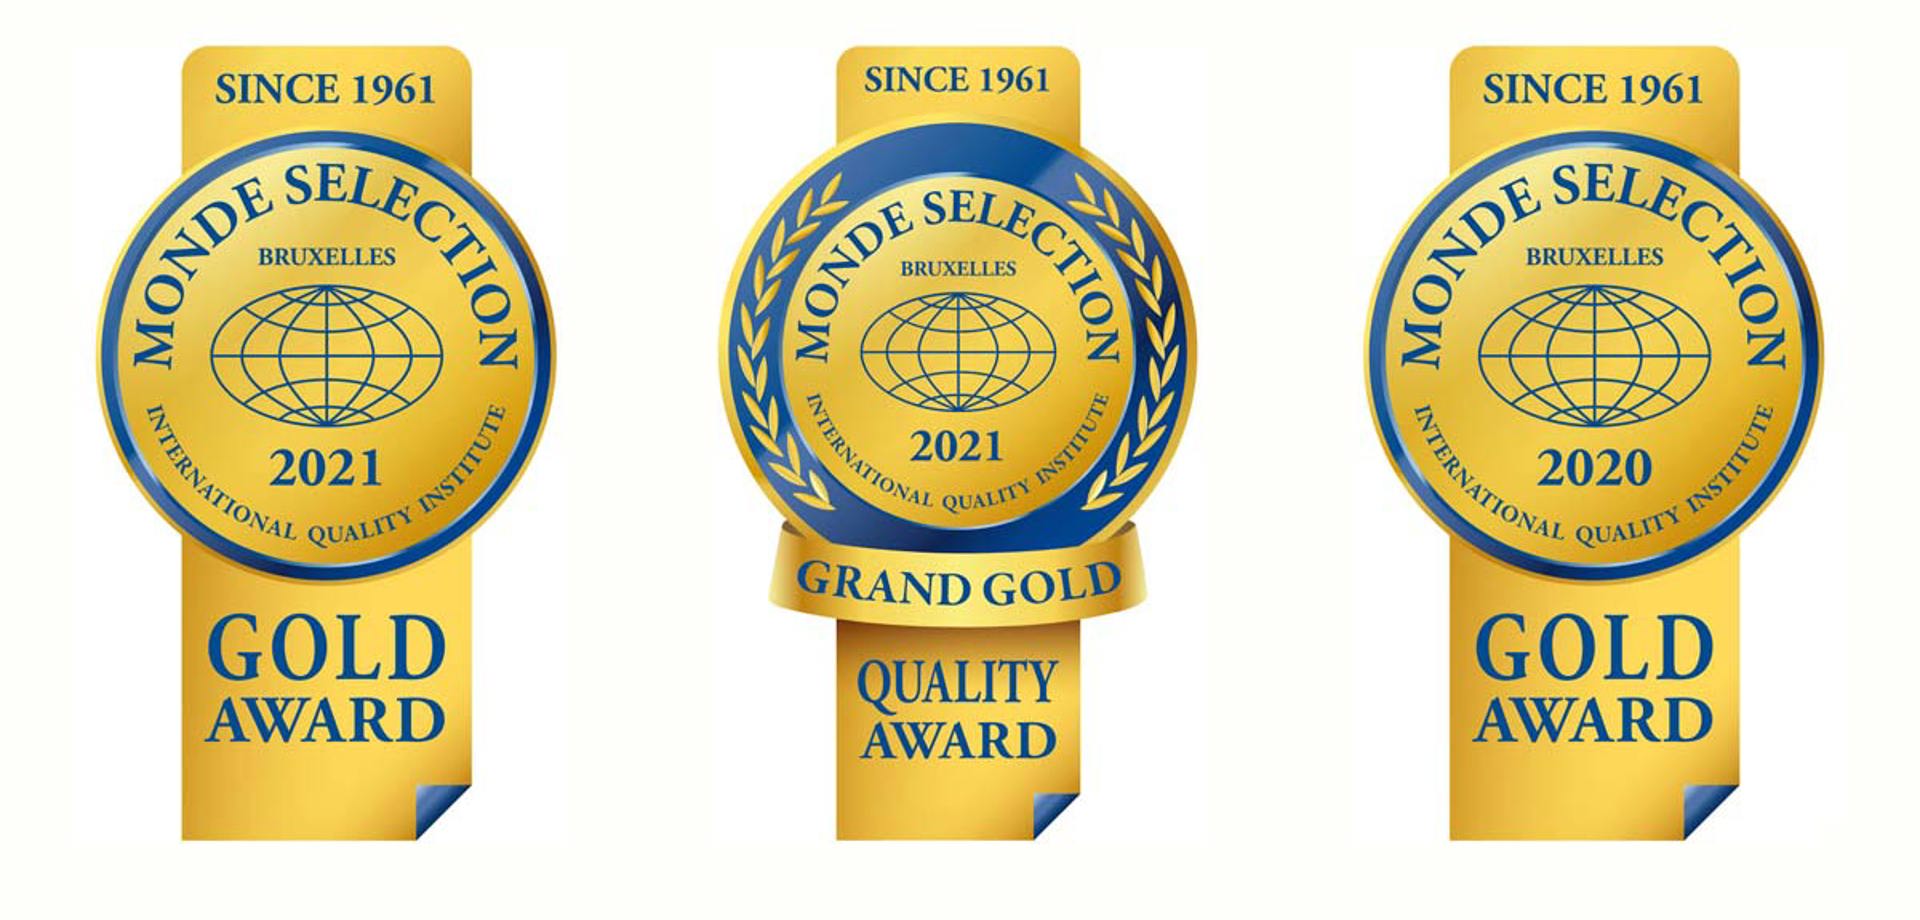 The Monde Selection 2020 Grand Gold Quality award, with the 2021 and 2020 Gold Quality award